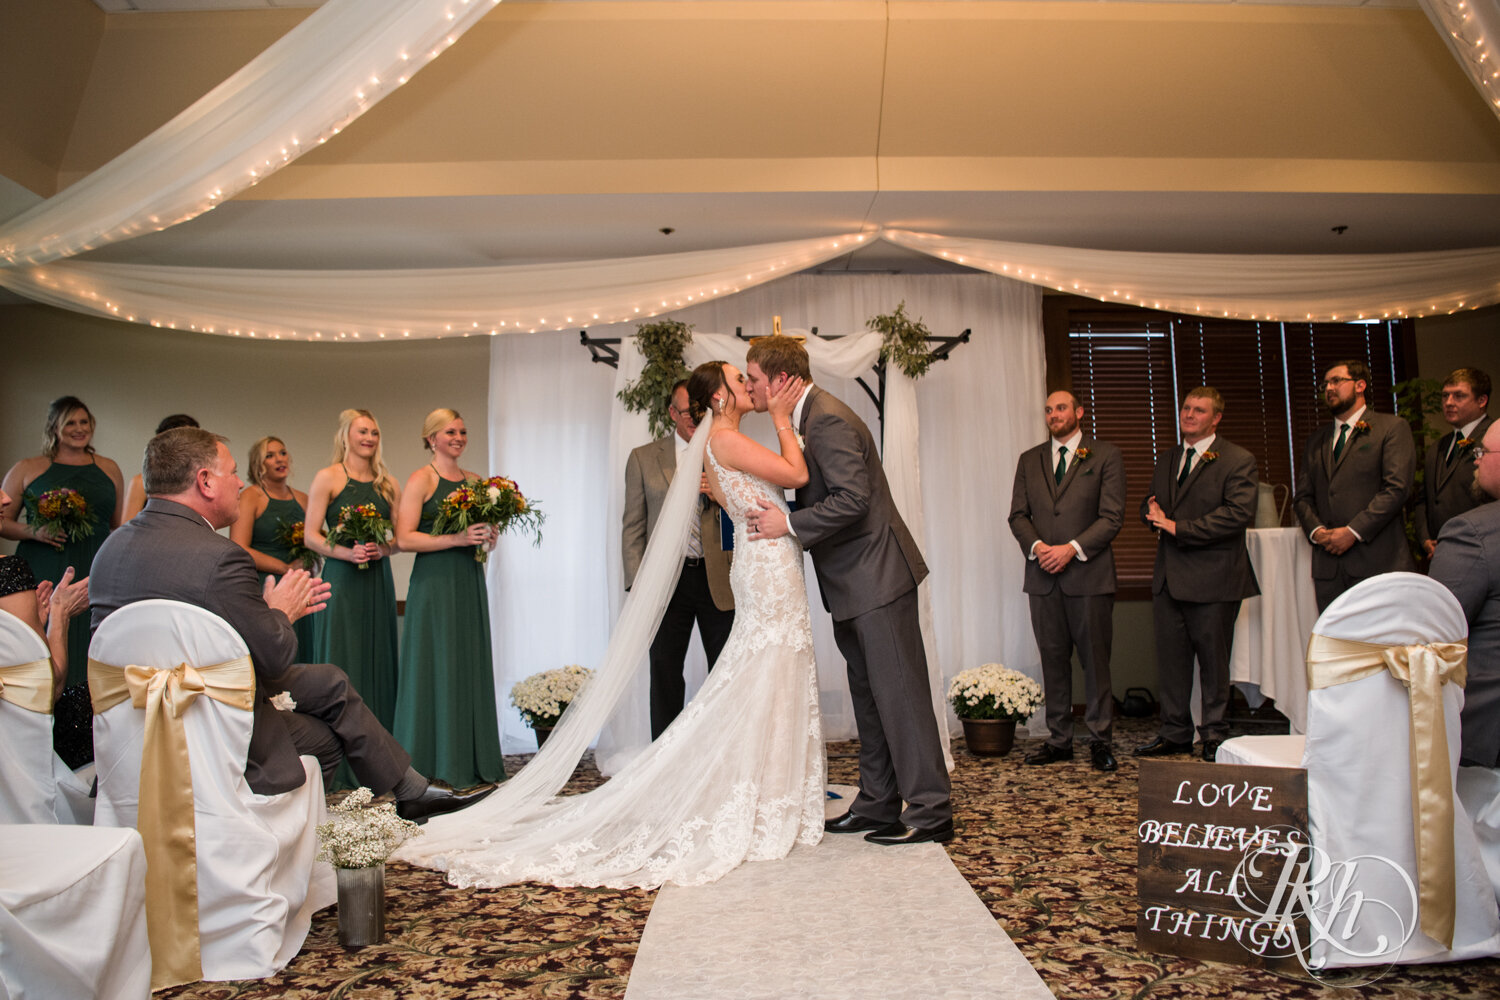 Bride and groom kiss during wedding ceremony at The Wilds Golf Club in Prior Lake, Minnesota.